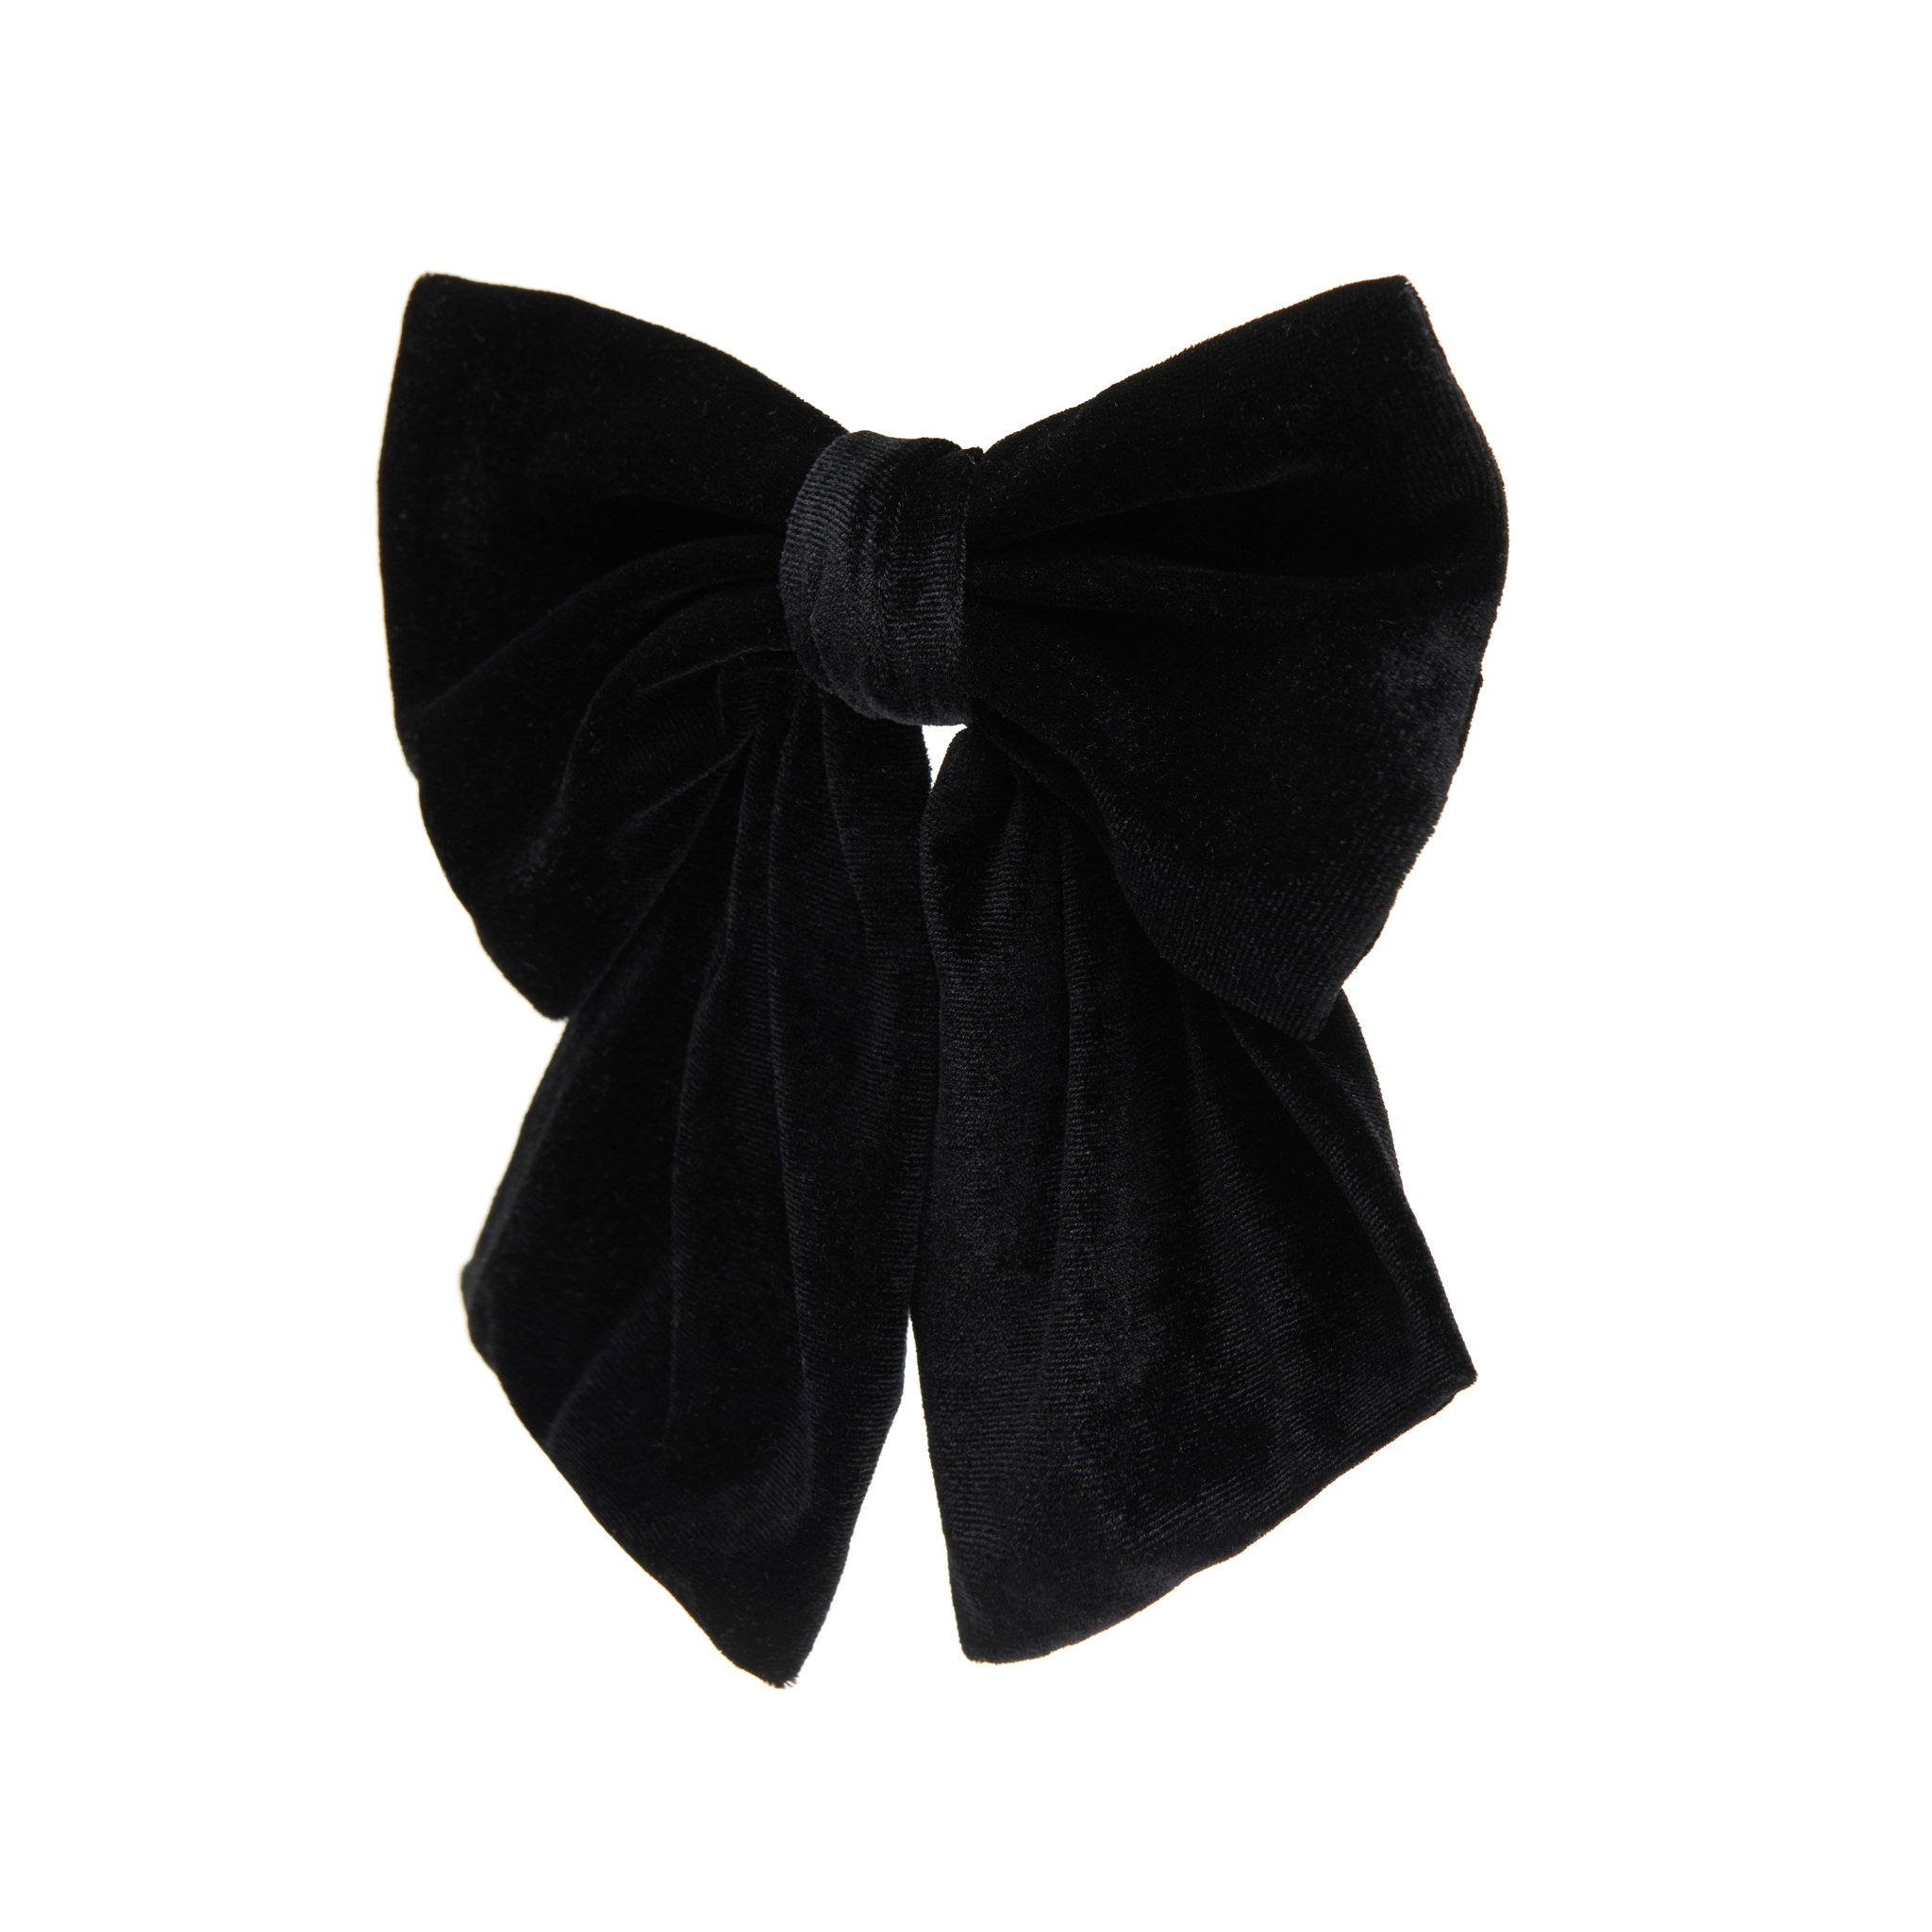 HOLLY JUNE Заколка Big Bow Hair Clip – Velvet Black holly june заколка bow hair clip – red